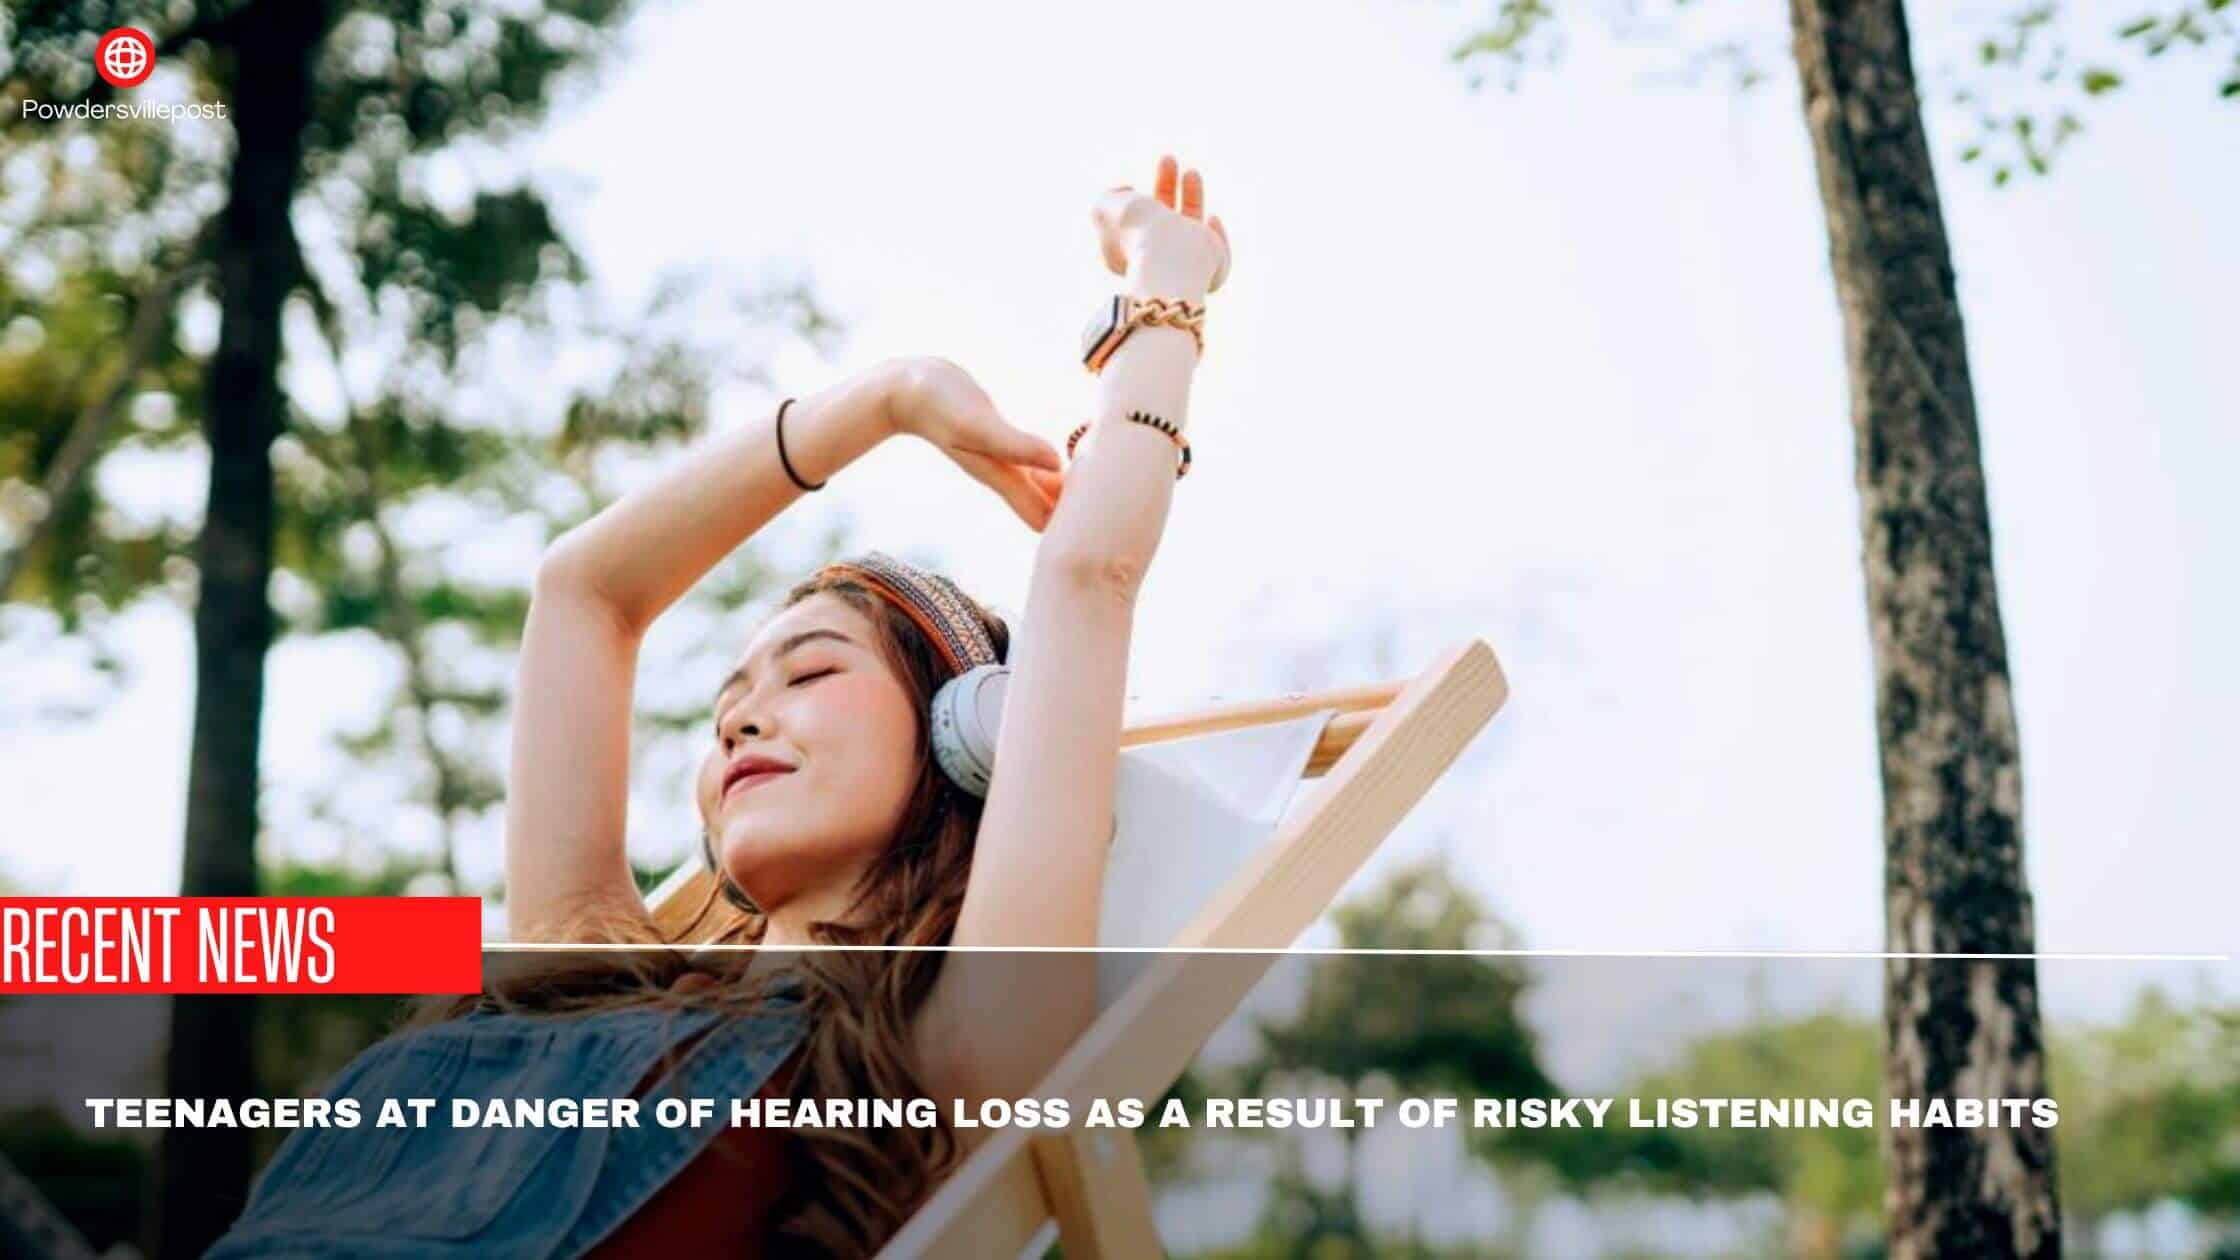 Teenagers At Danger Of Hearing Loss As A Result Of Risky Listening Habits